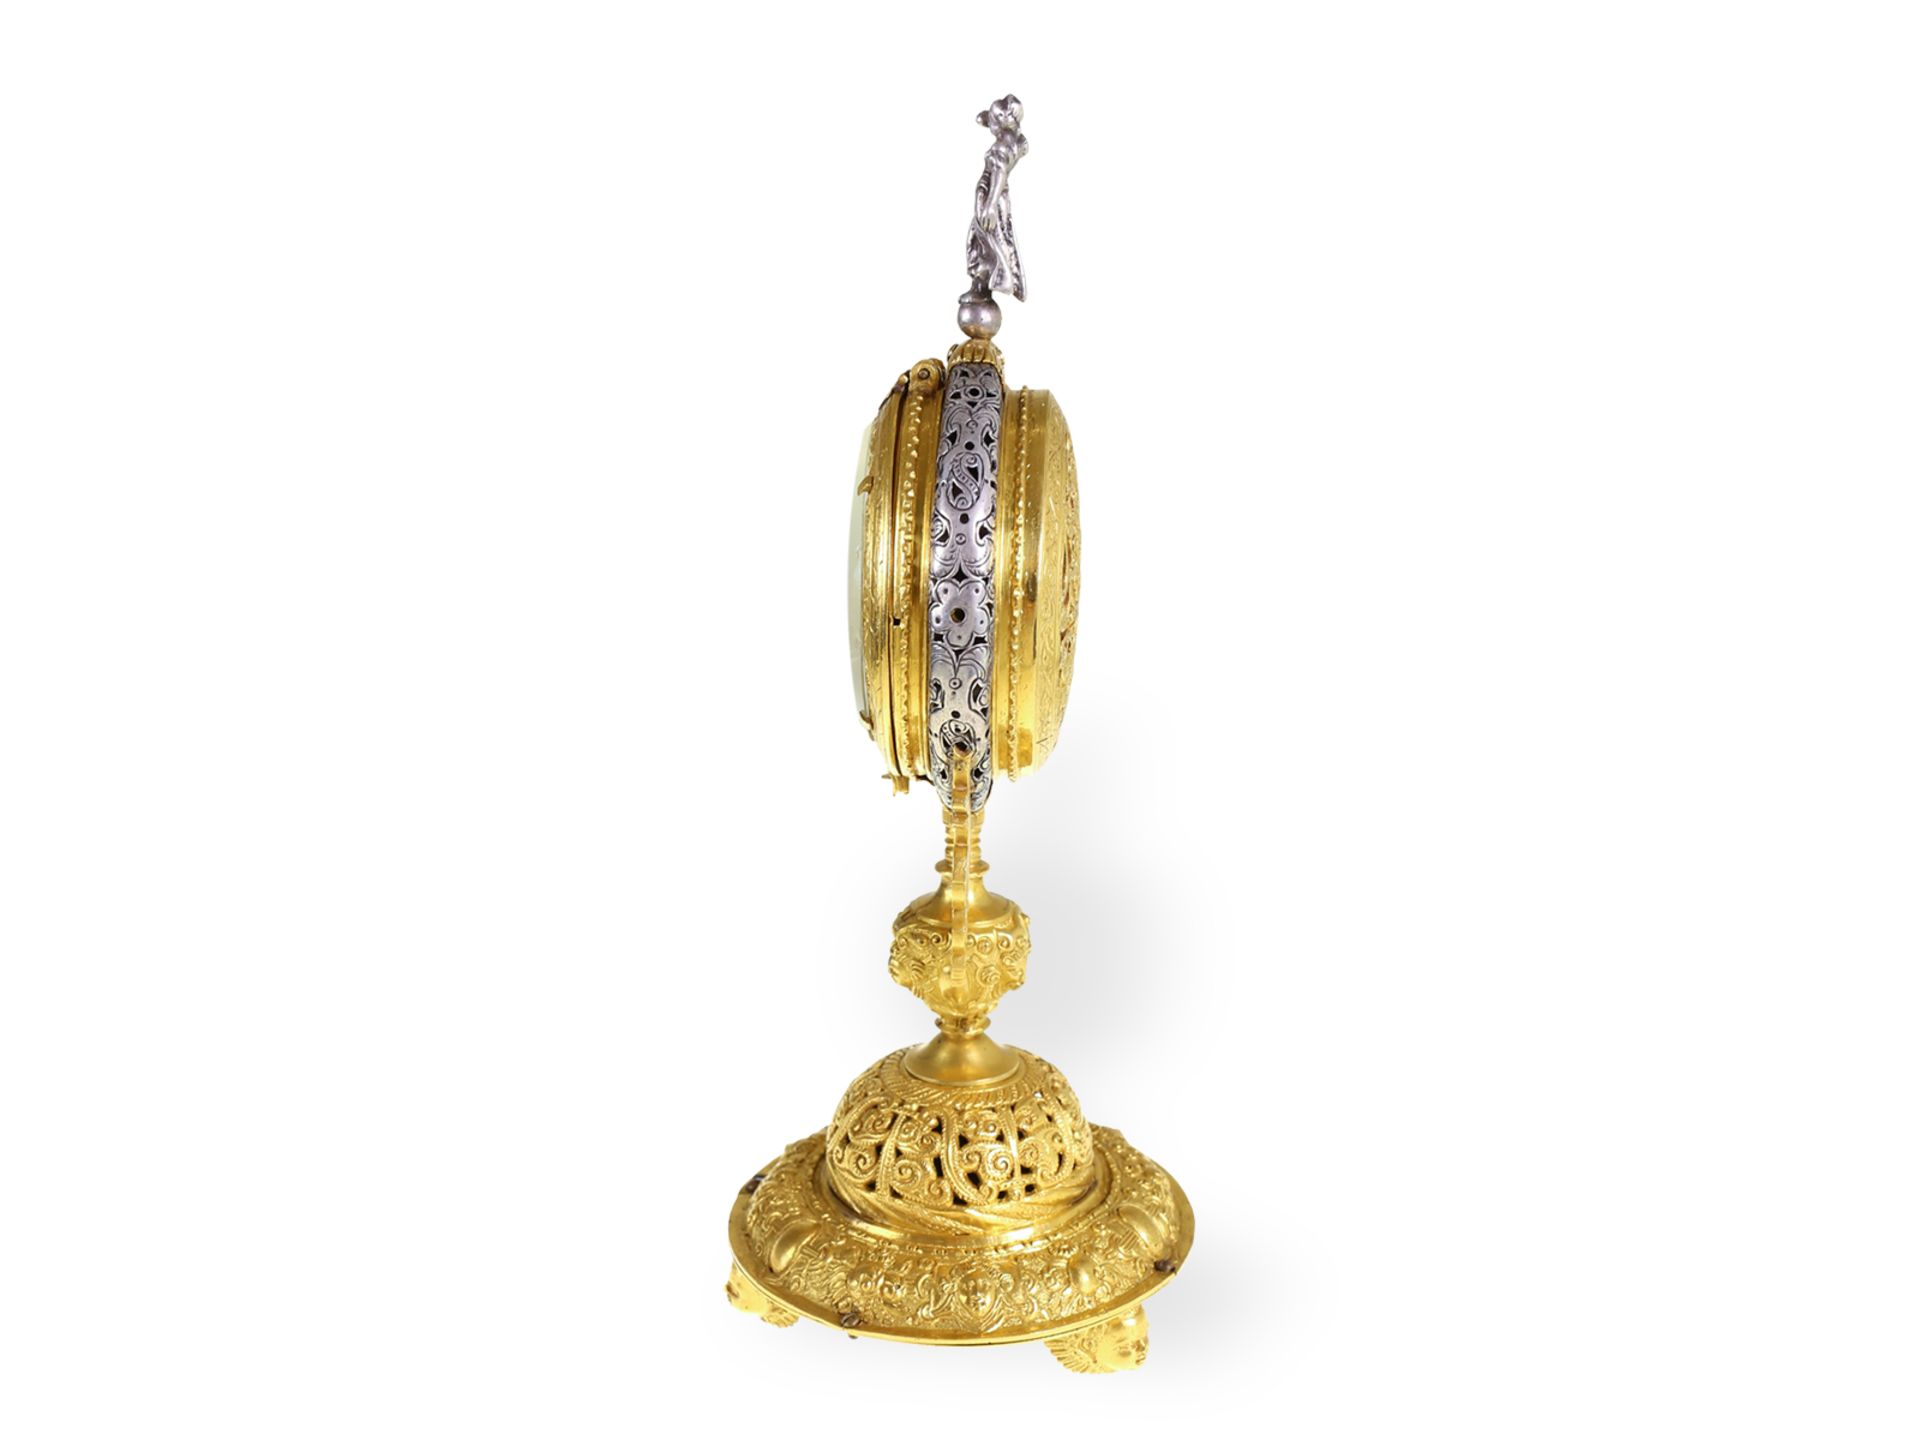 Table clock: important Renaissance monstrance clock with striking mechanism and alarm, maker's mark  - Image 6 of 7